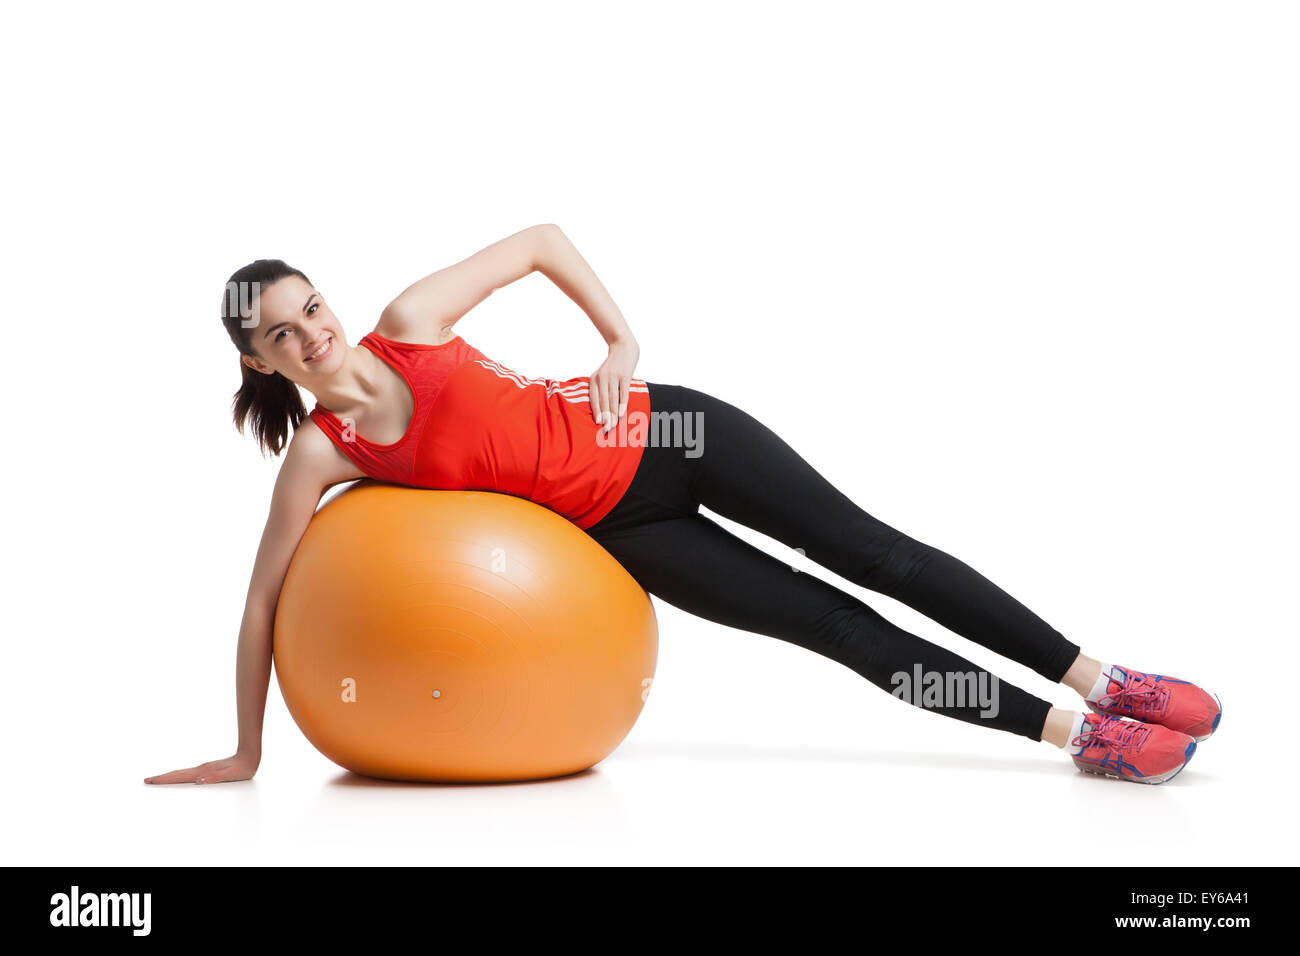 Beautiful sport woman doing  fitness exercise on ball Stock Photo